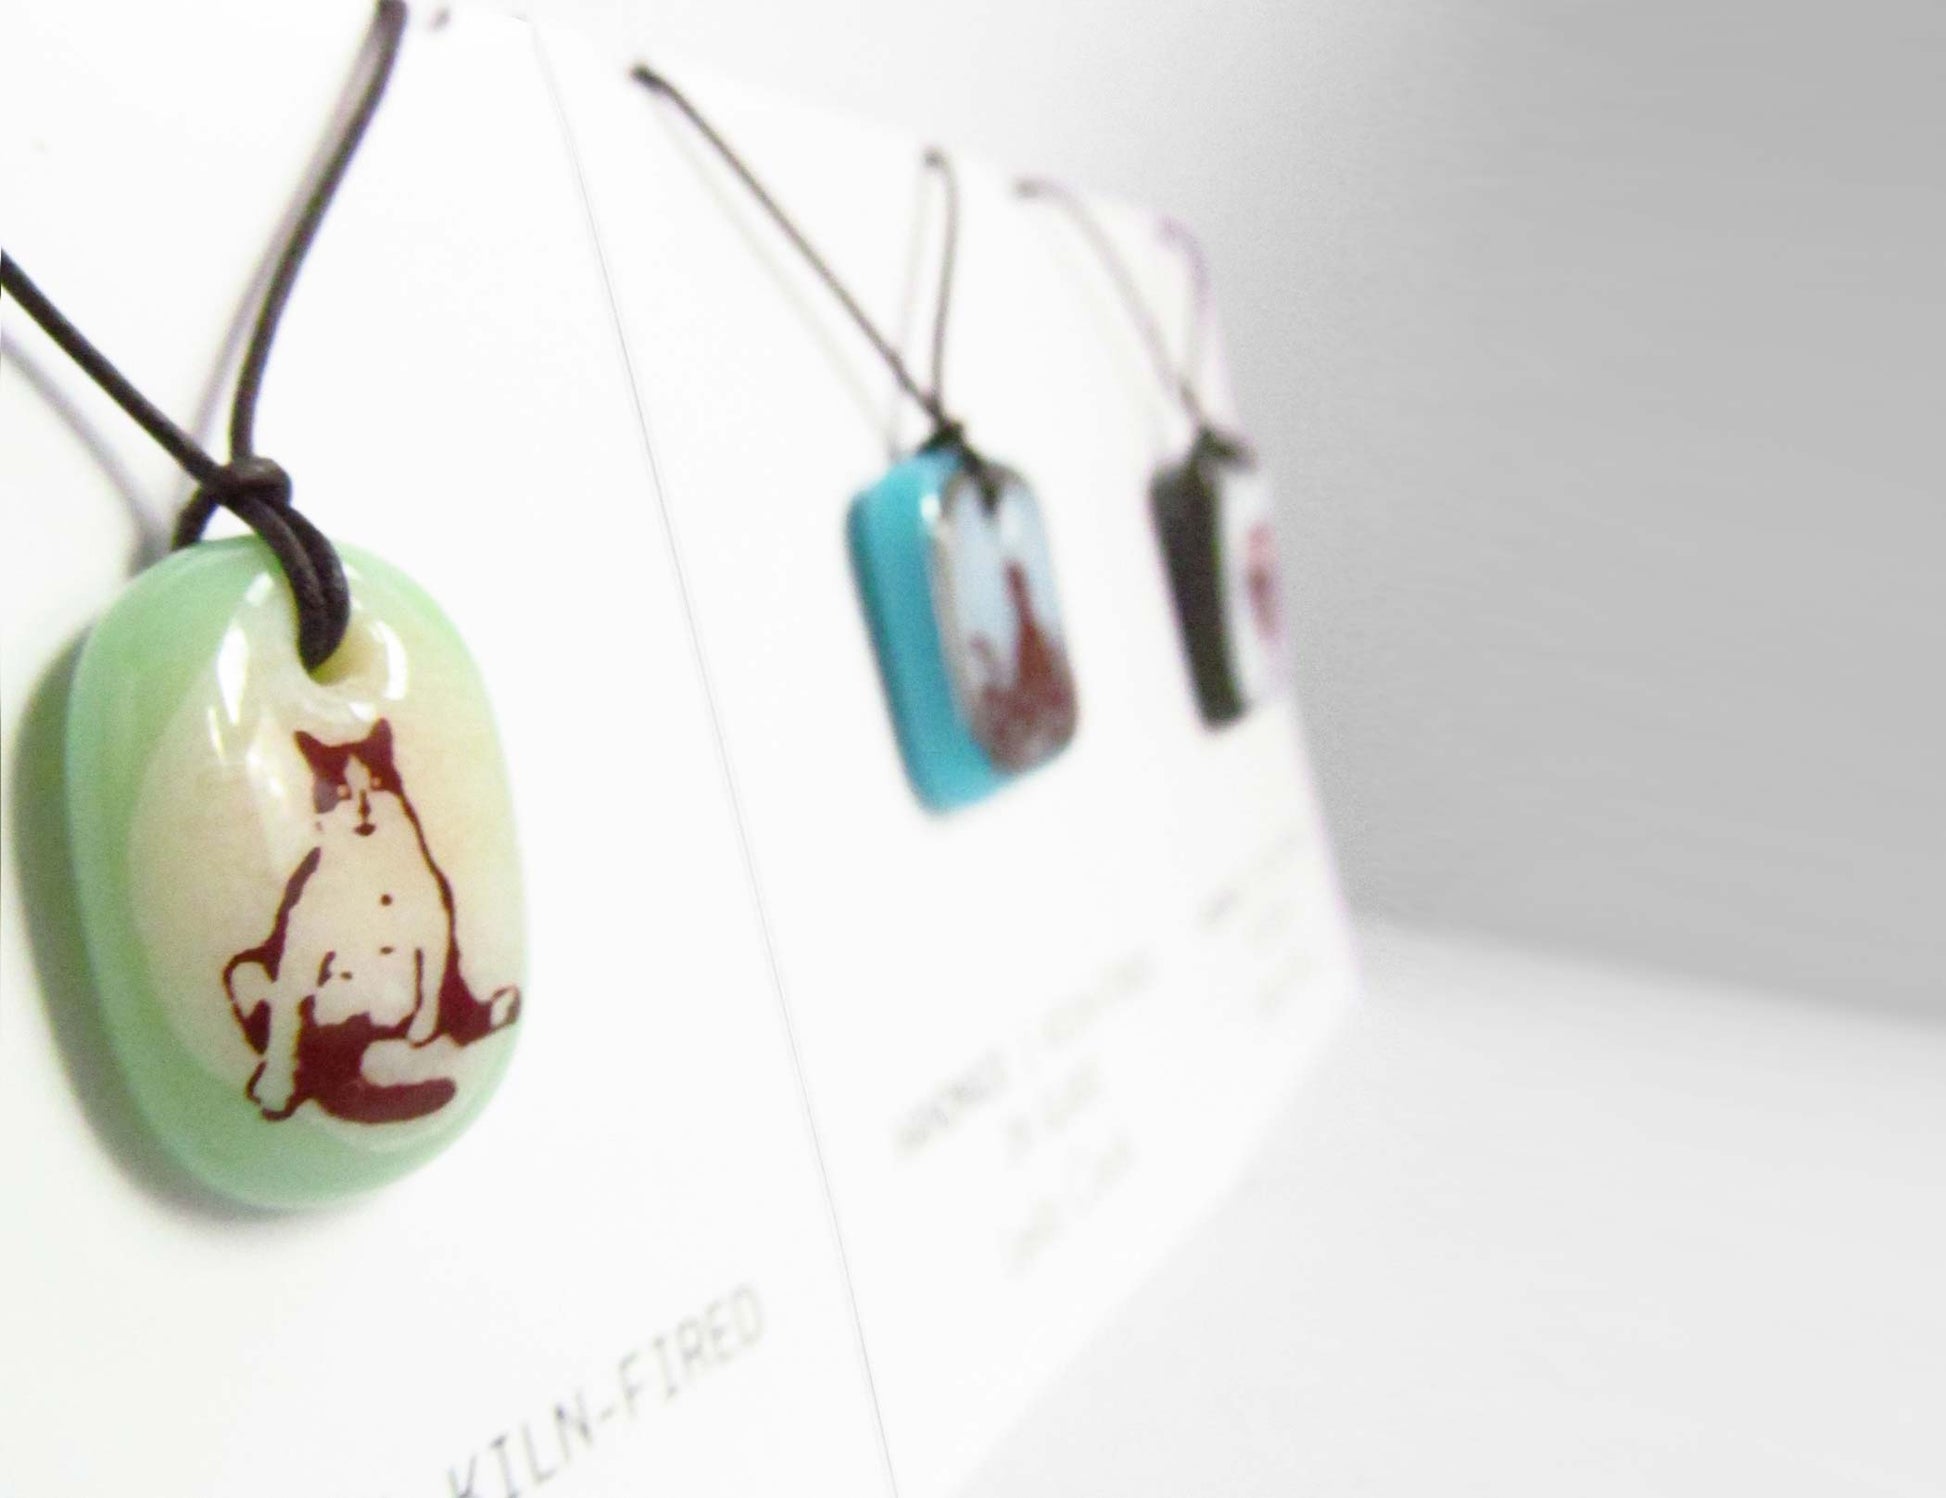 Penguin jewelry handmade by Leila Cools 